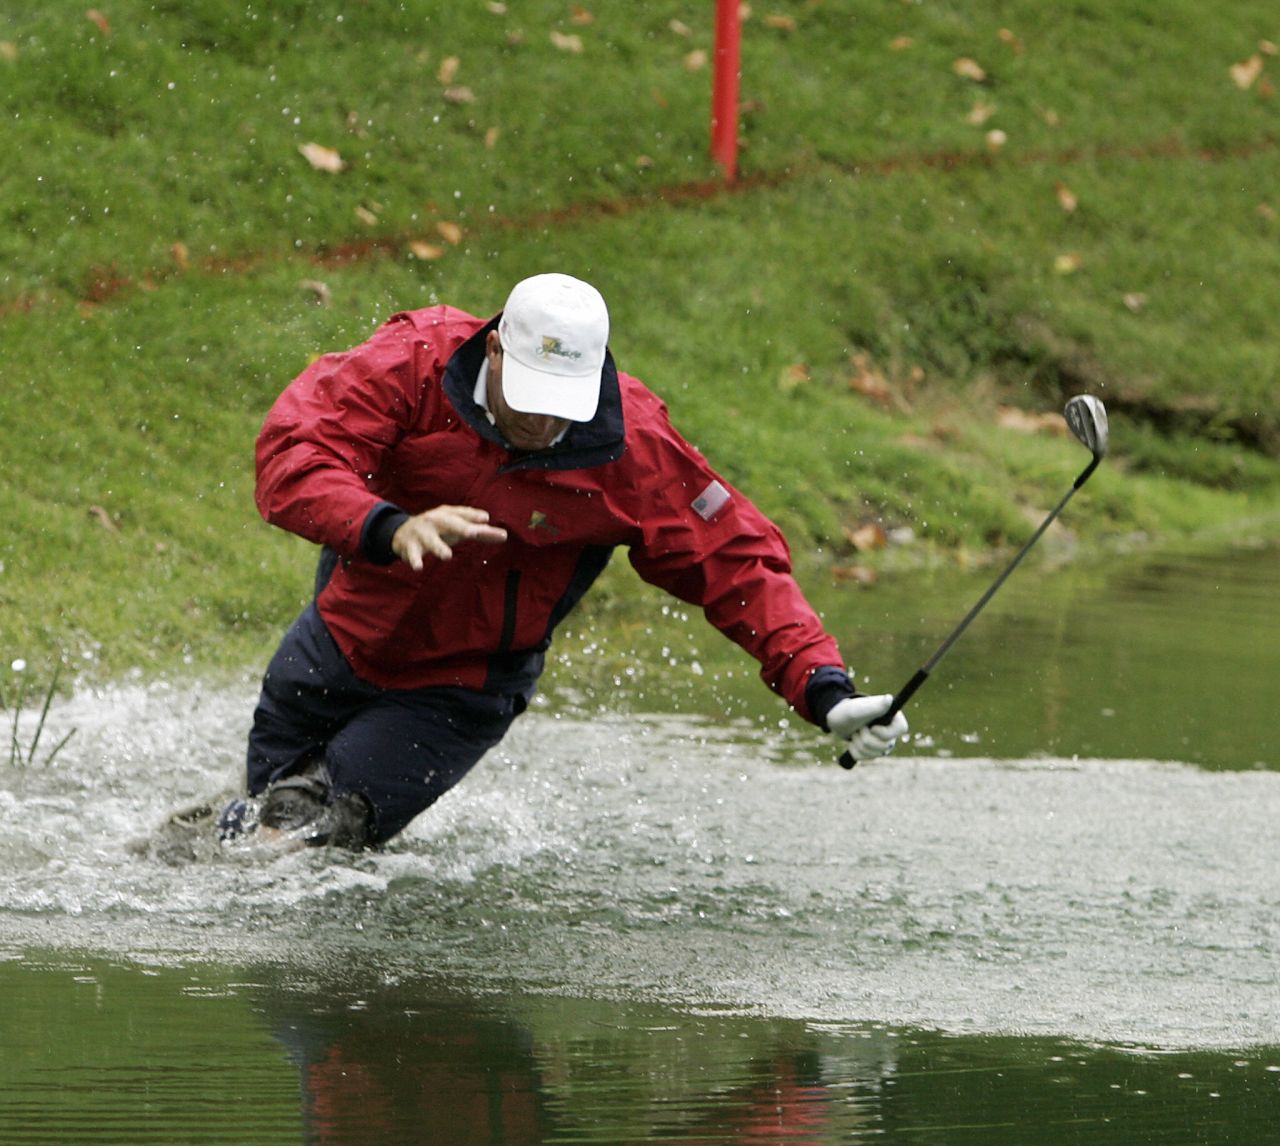 Golf-ball divers can make a thriving business from other people's misfortune. Here, U.S. player Woody Austin falls while hitting his ball out of the water at the four-ball matches of the 2007 Presidents Cup in Montreal, Canada.